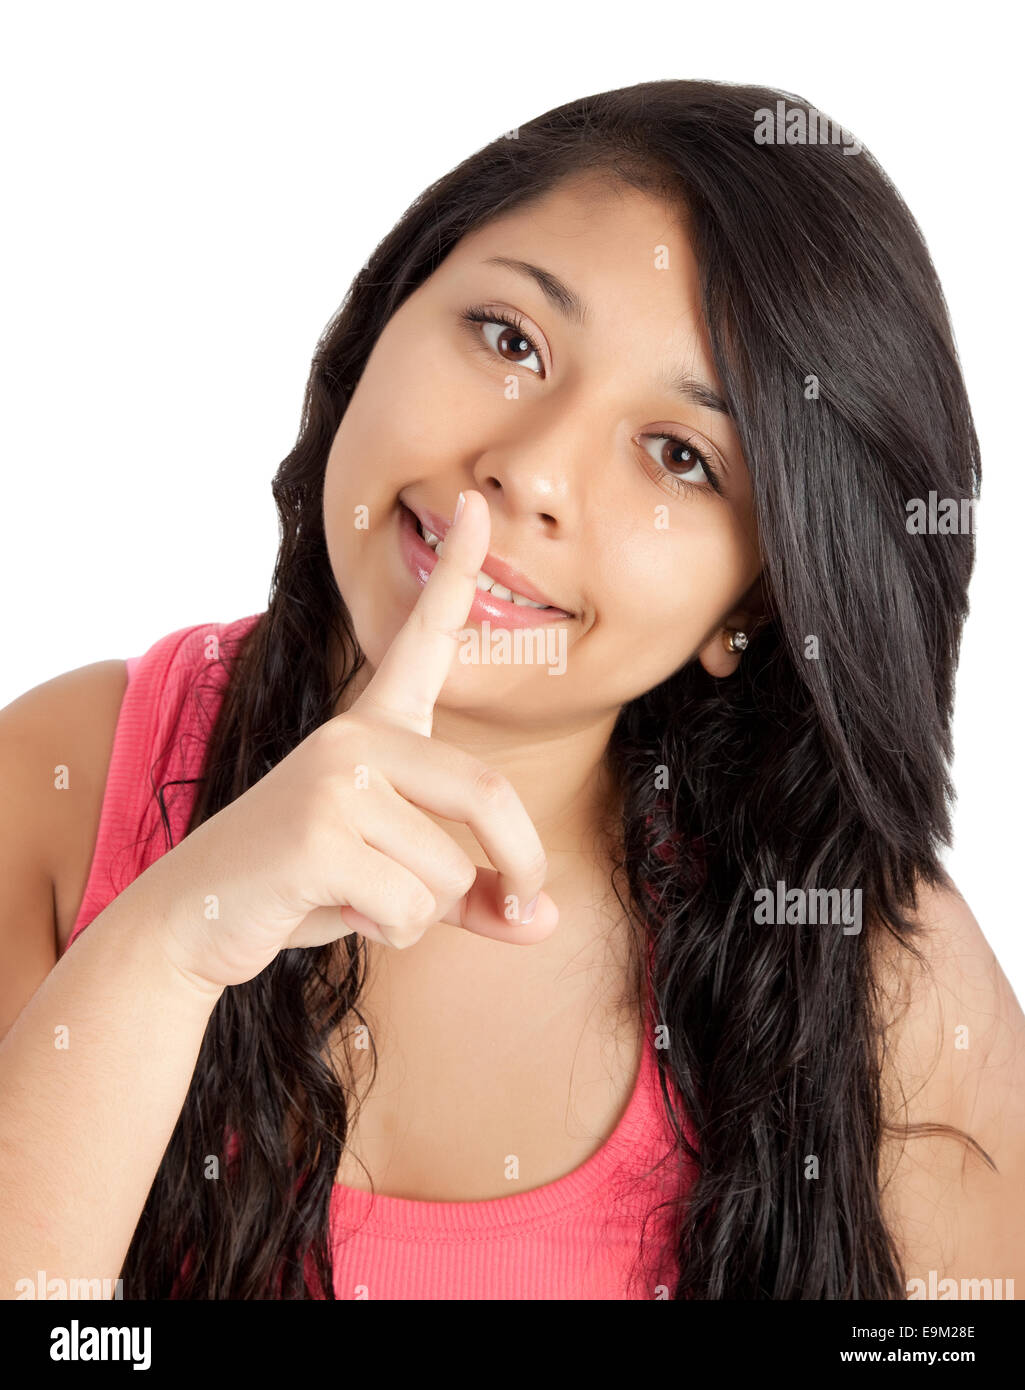 portrait of a young woman with finger on her lips Stock Photo